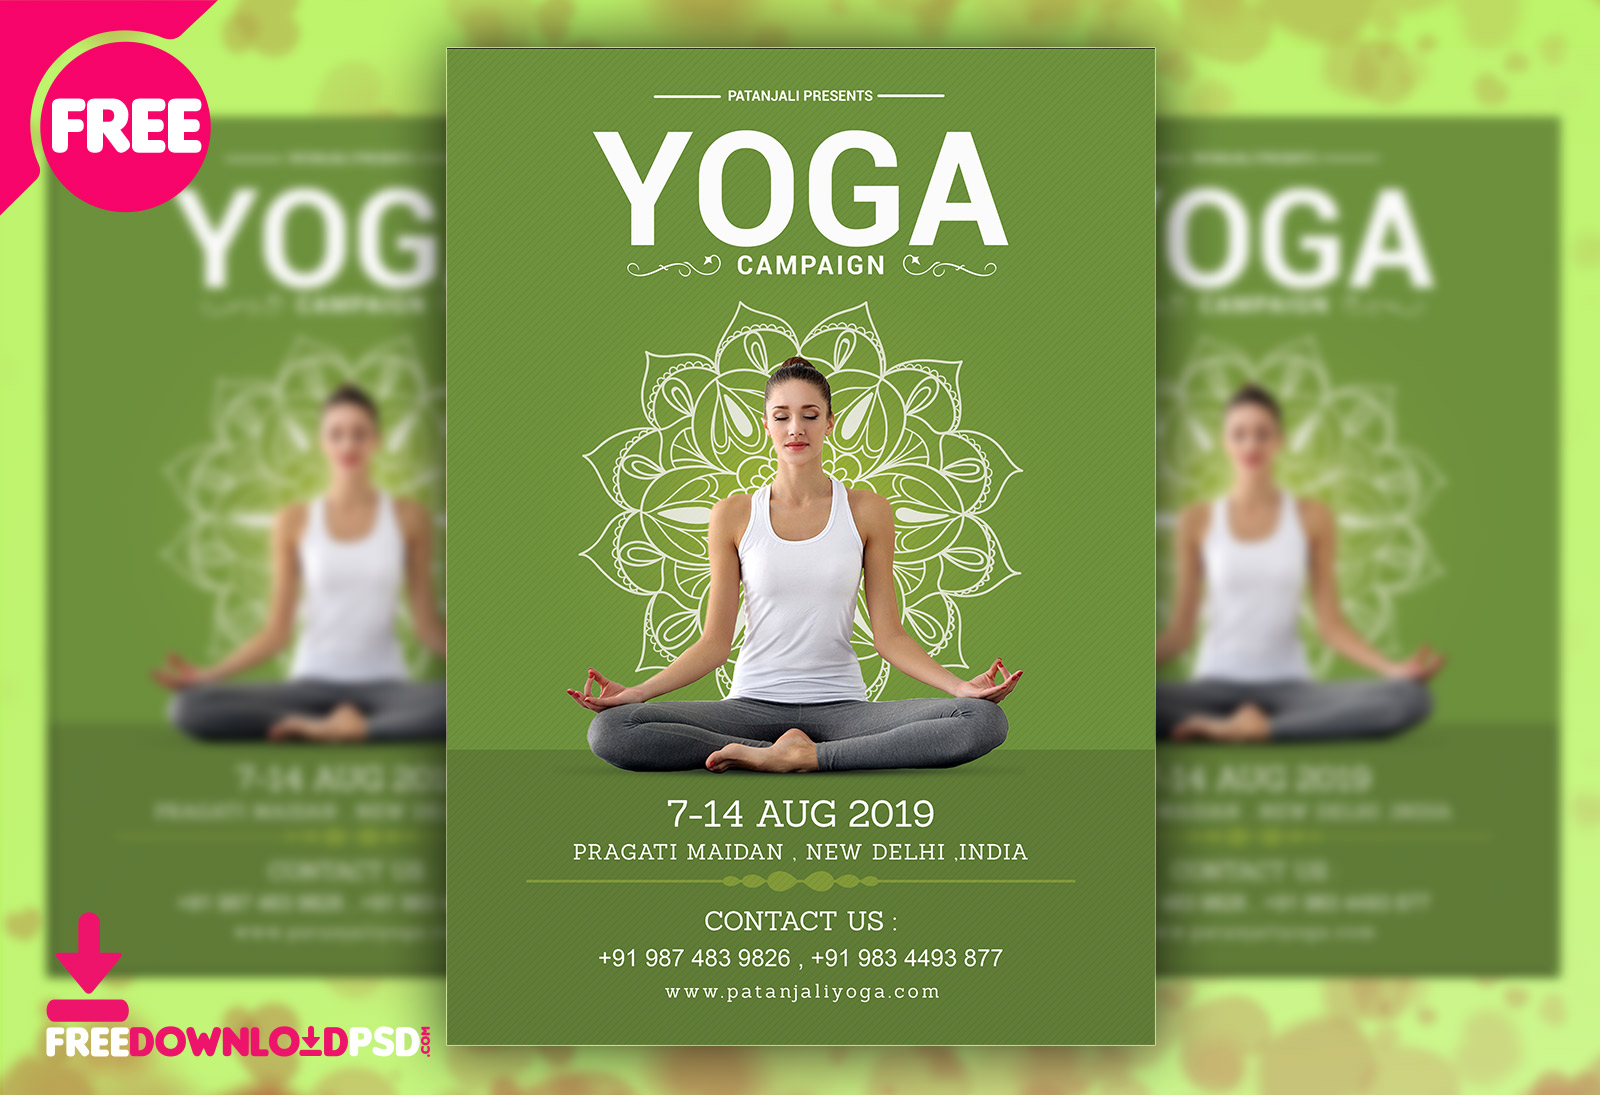 Download Yoga Campaign Flyer Free Psd Freedownloadpsd Com